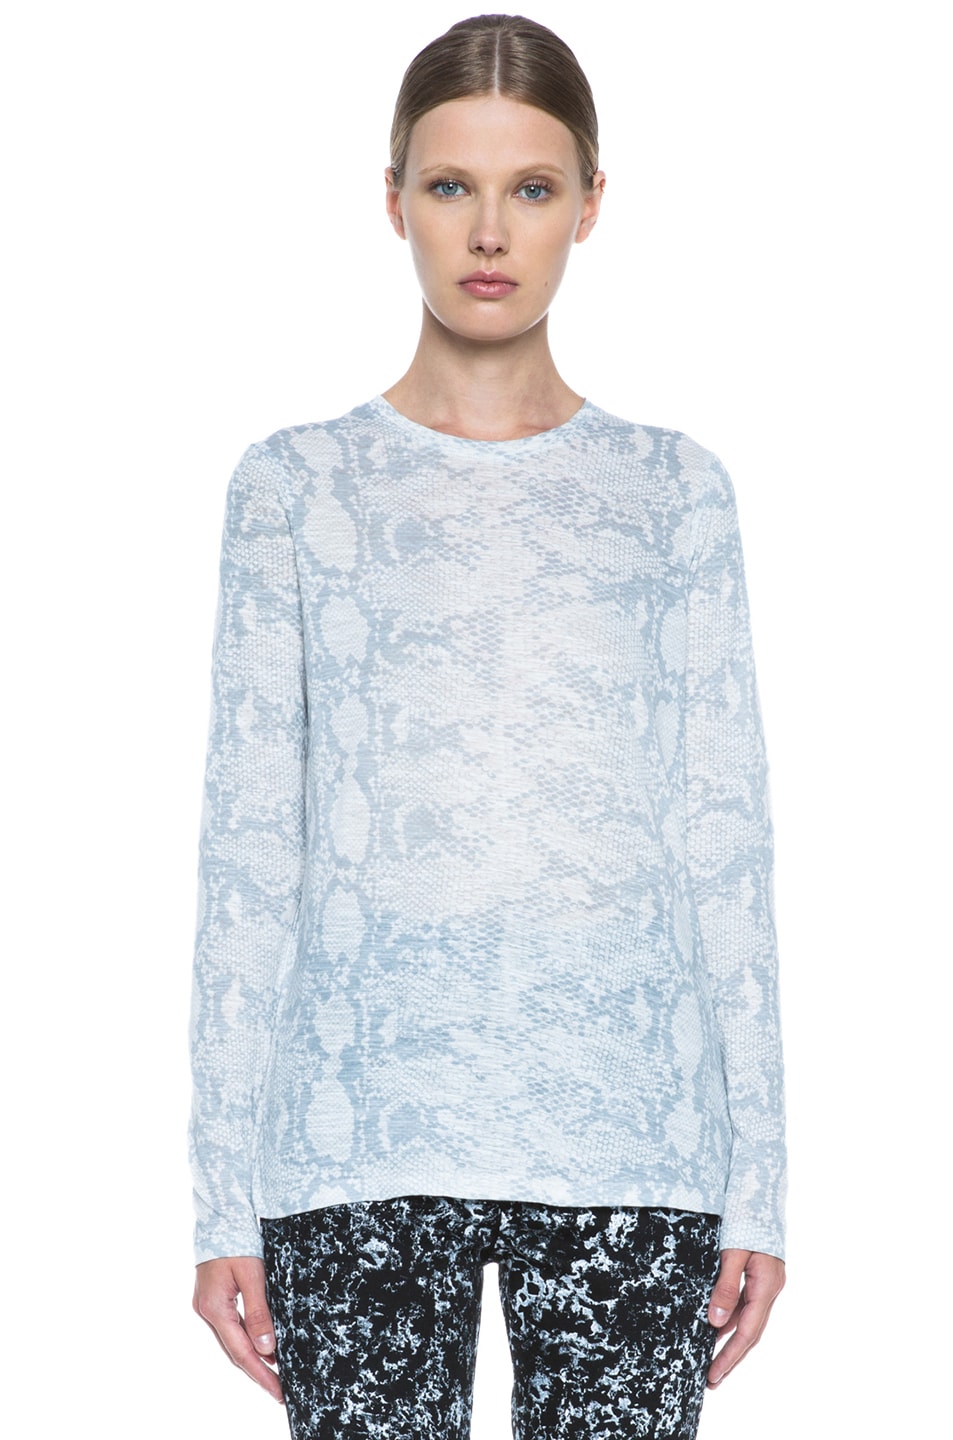 Proenza Schouler Printed Cotton Tee in Smoked Python | FWRD